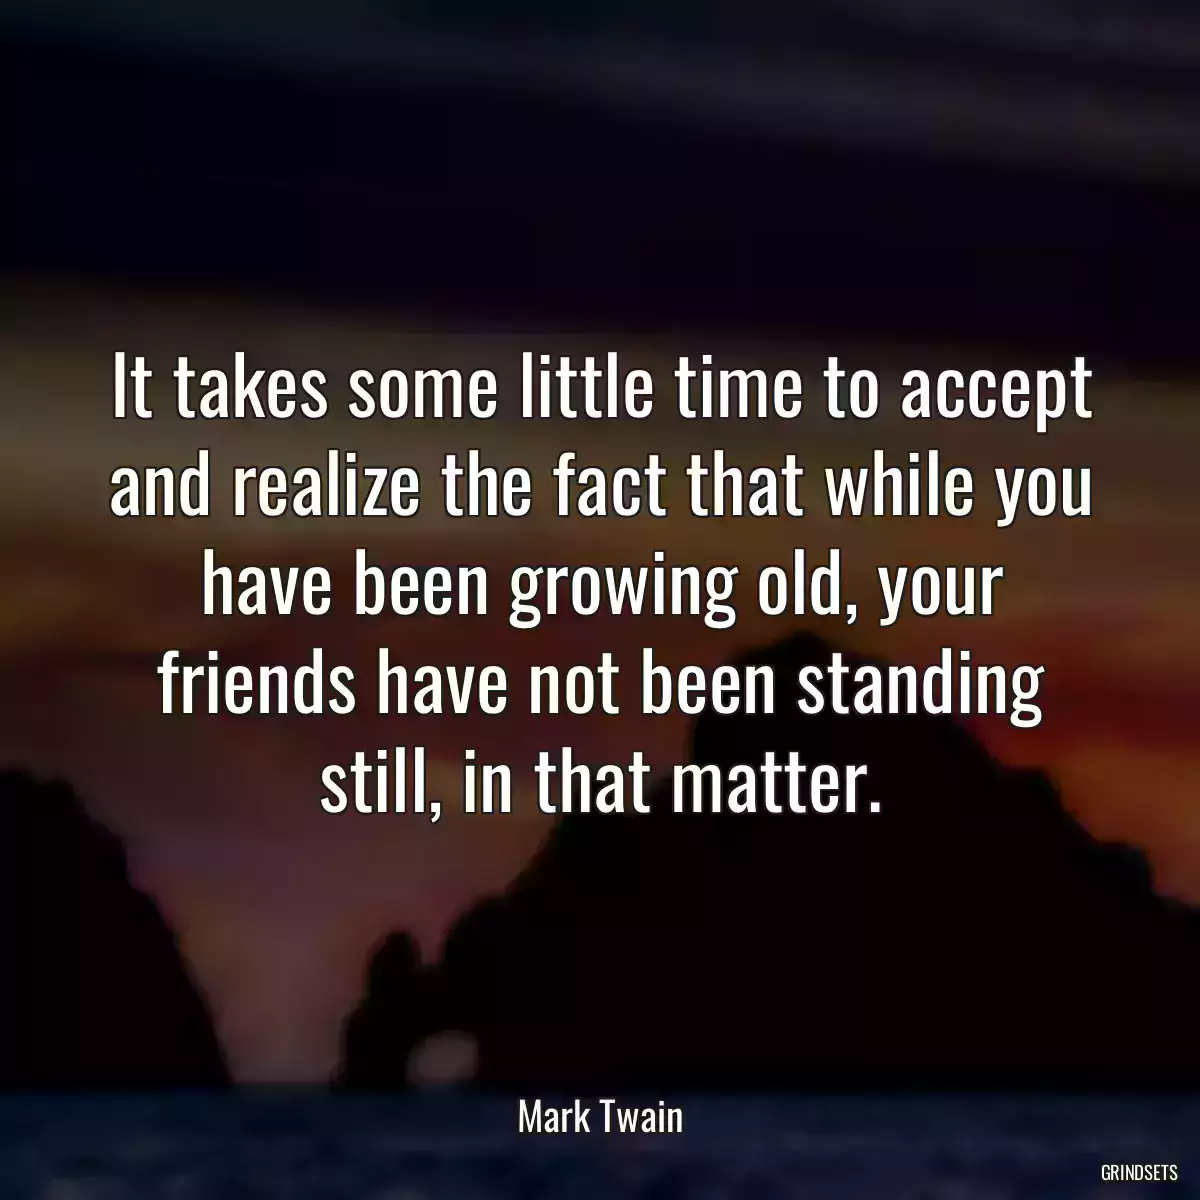 It takes some little time to accept and realize the fact that while you have been growing old, your friends have not been standing still, in that matter.